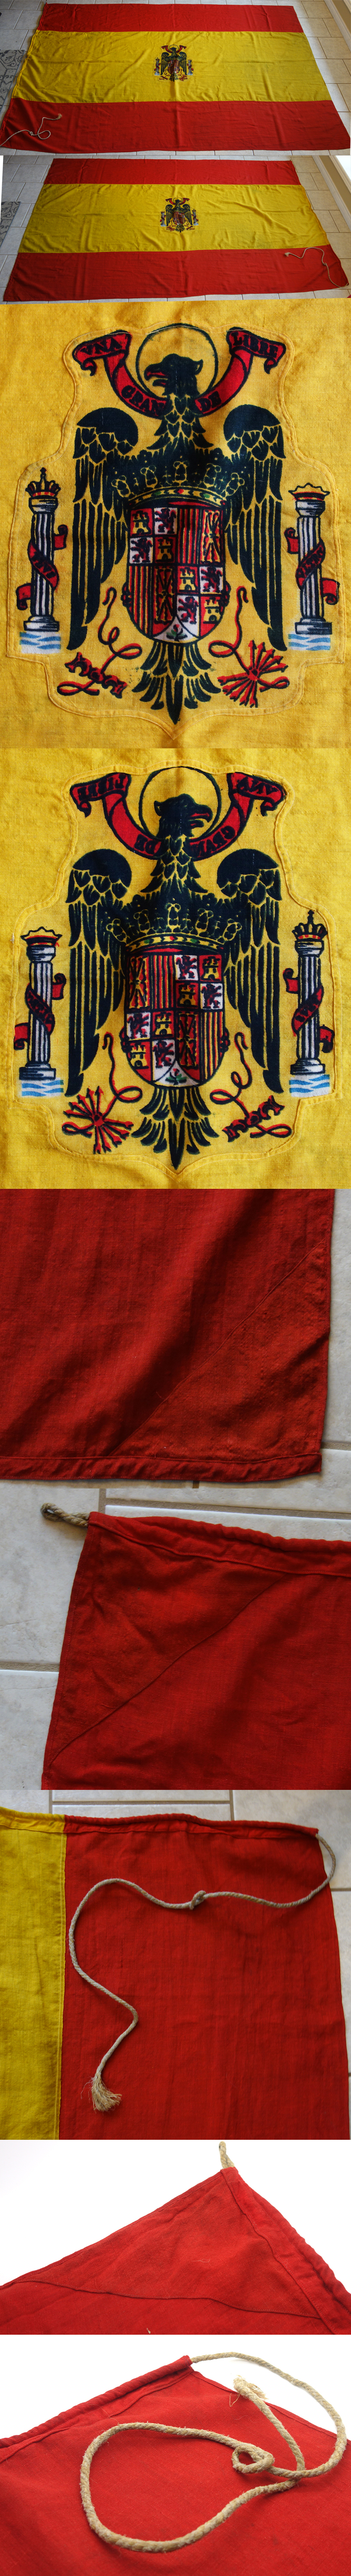 Nationalist Flag from the Spanish Civil